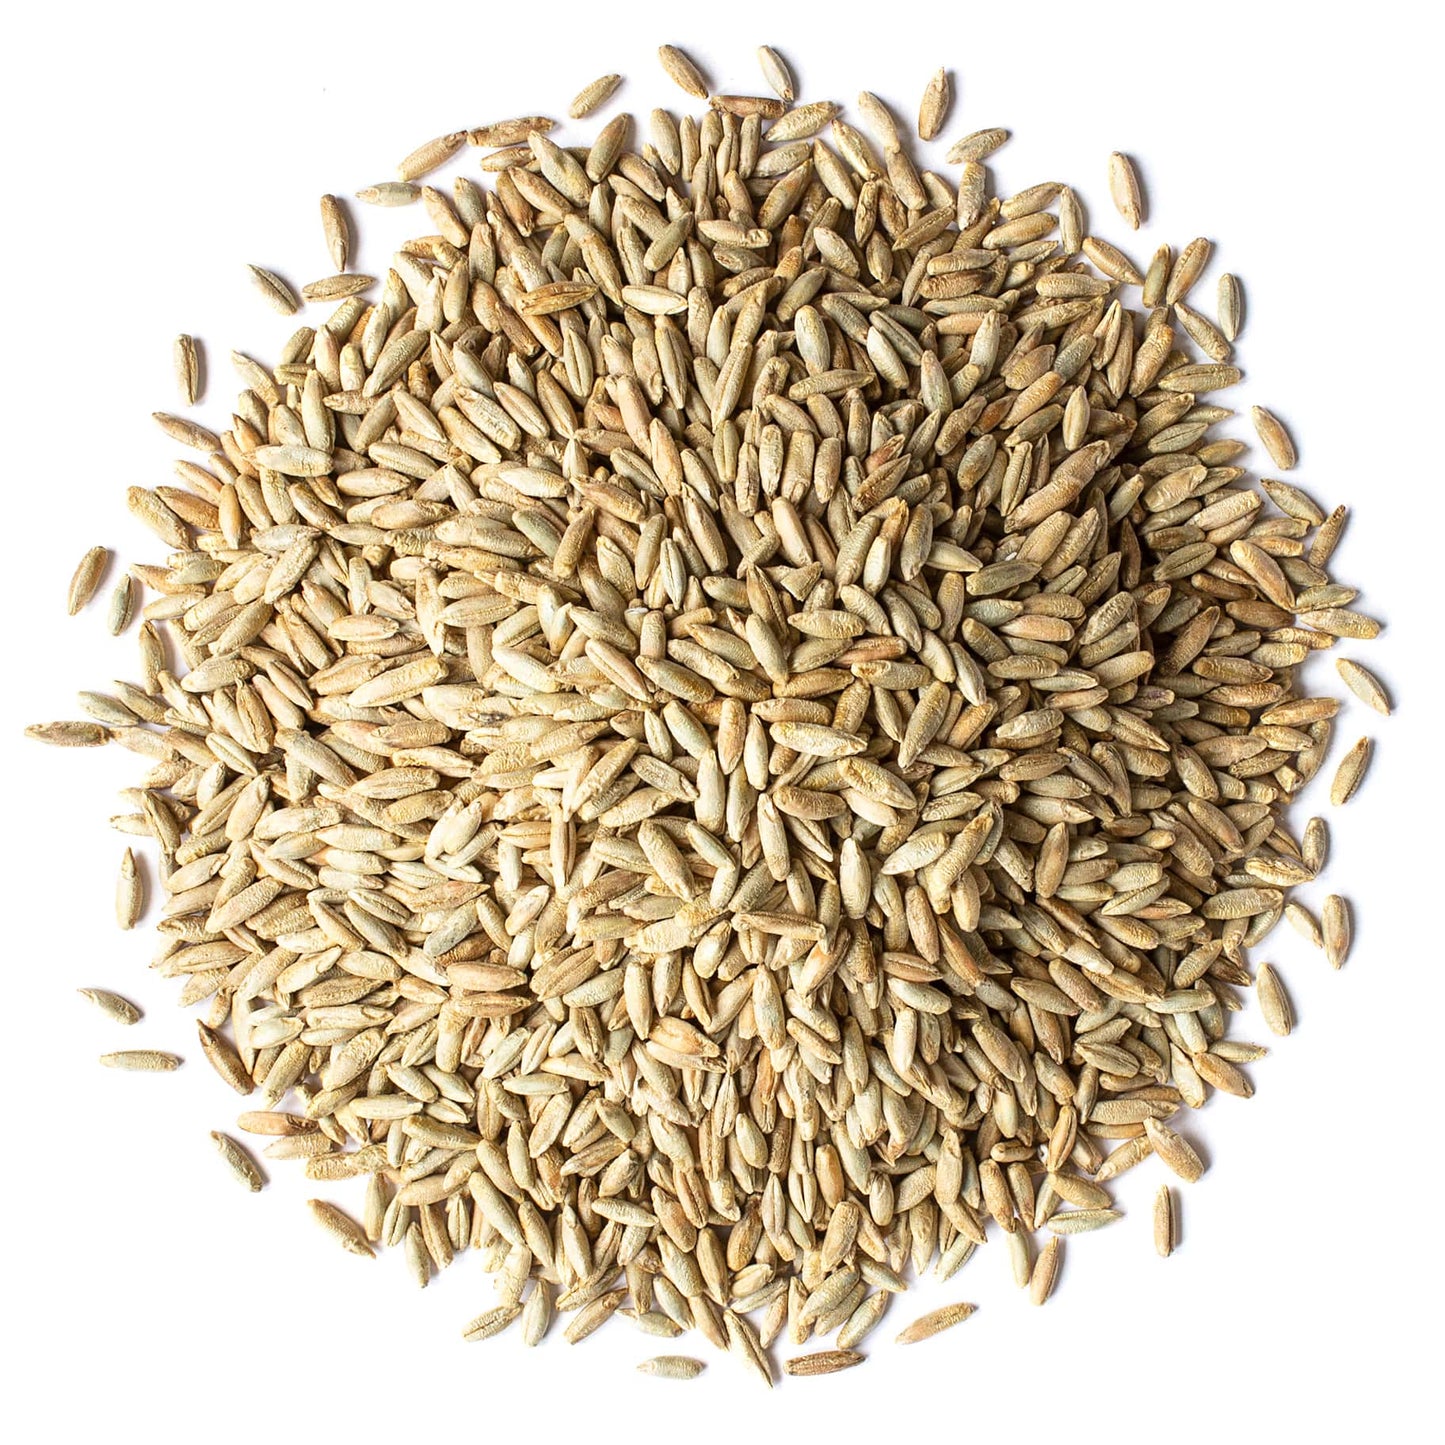 Organic Rye Berries - Non-GMO, Kosher, Raw, Bulk Seeds, Product of the USA - by Food to Live